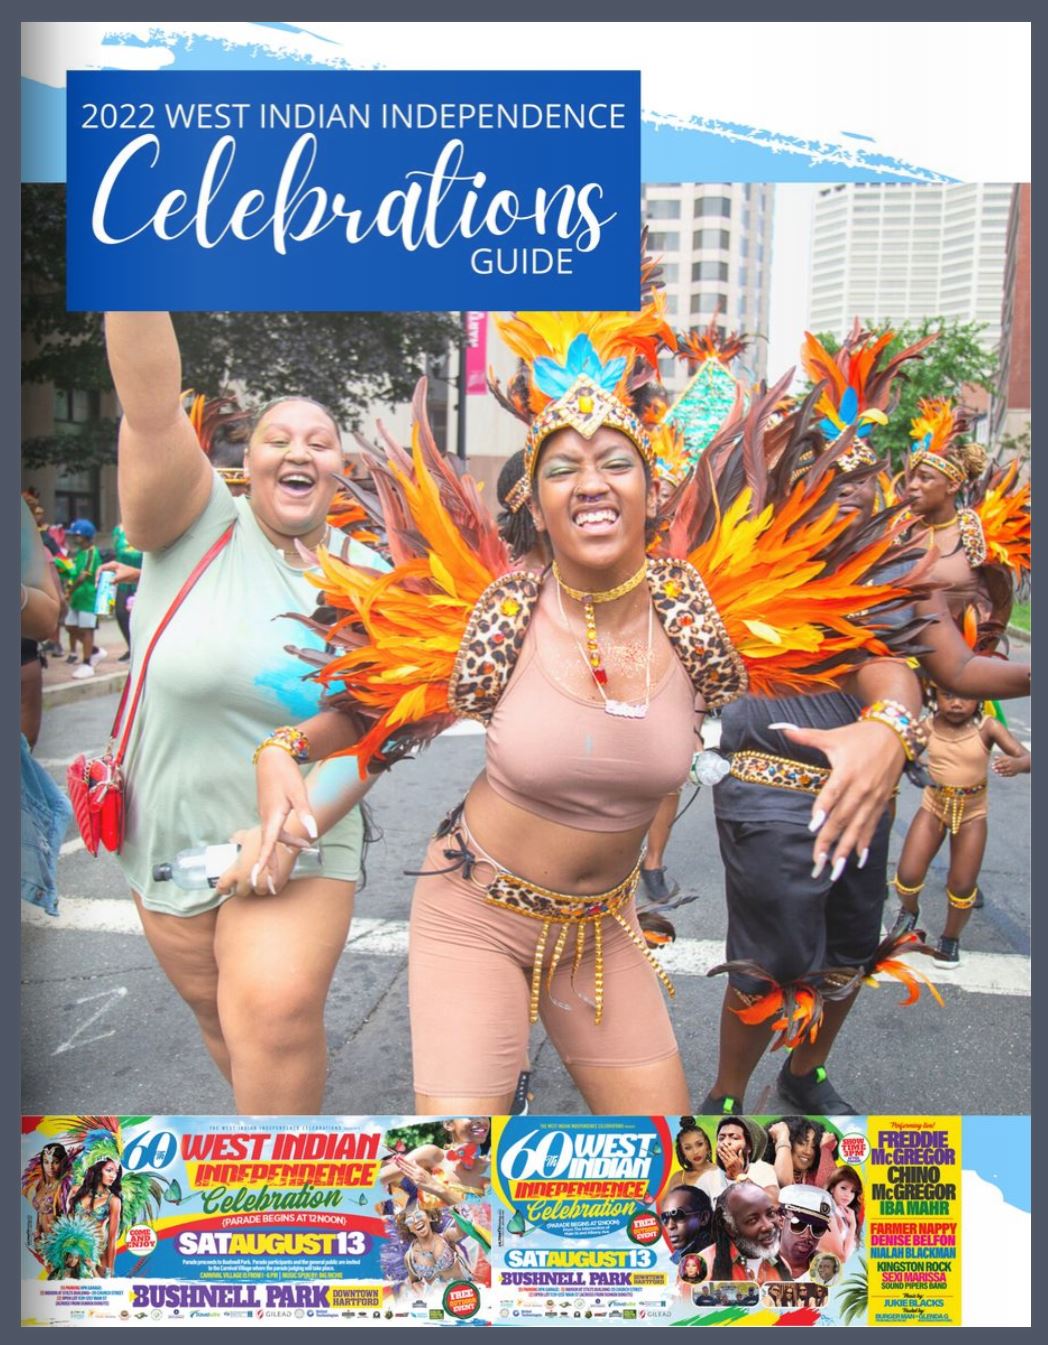 2022 West Indian Independence Celebrations GUIDE